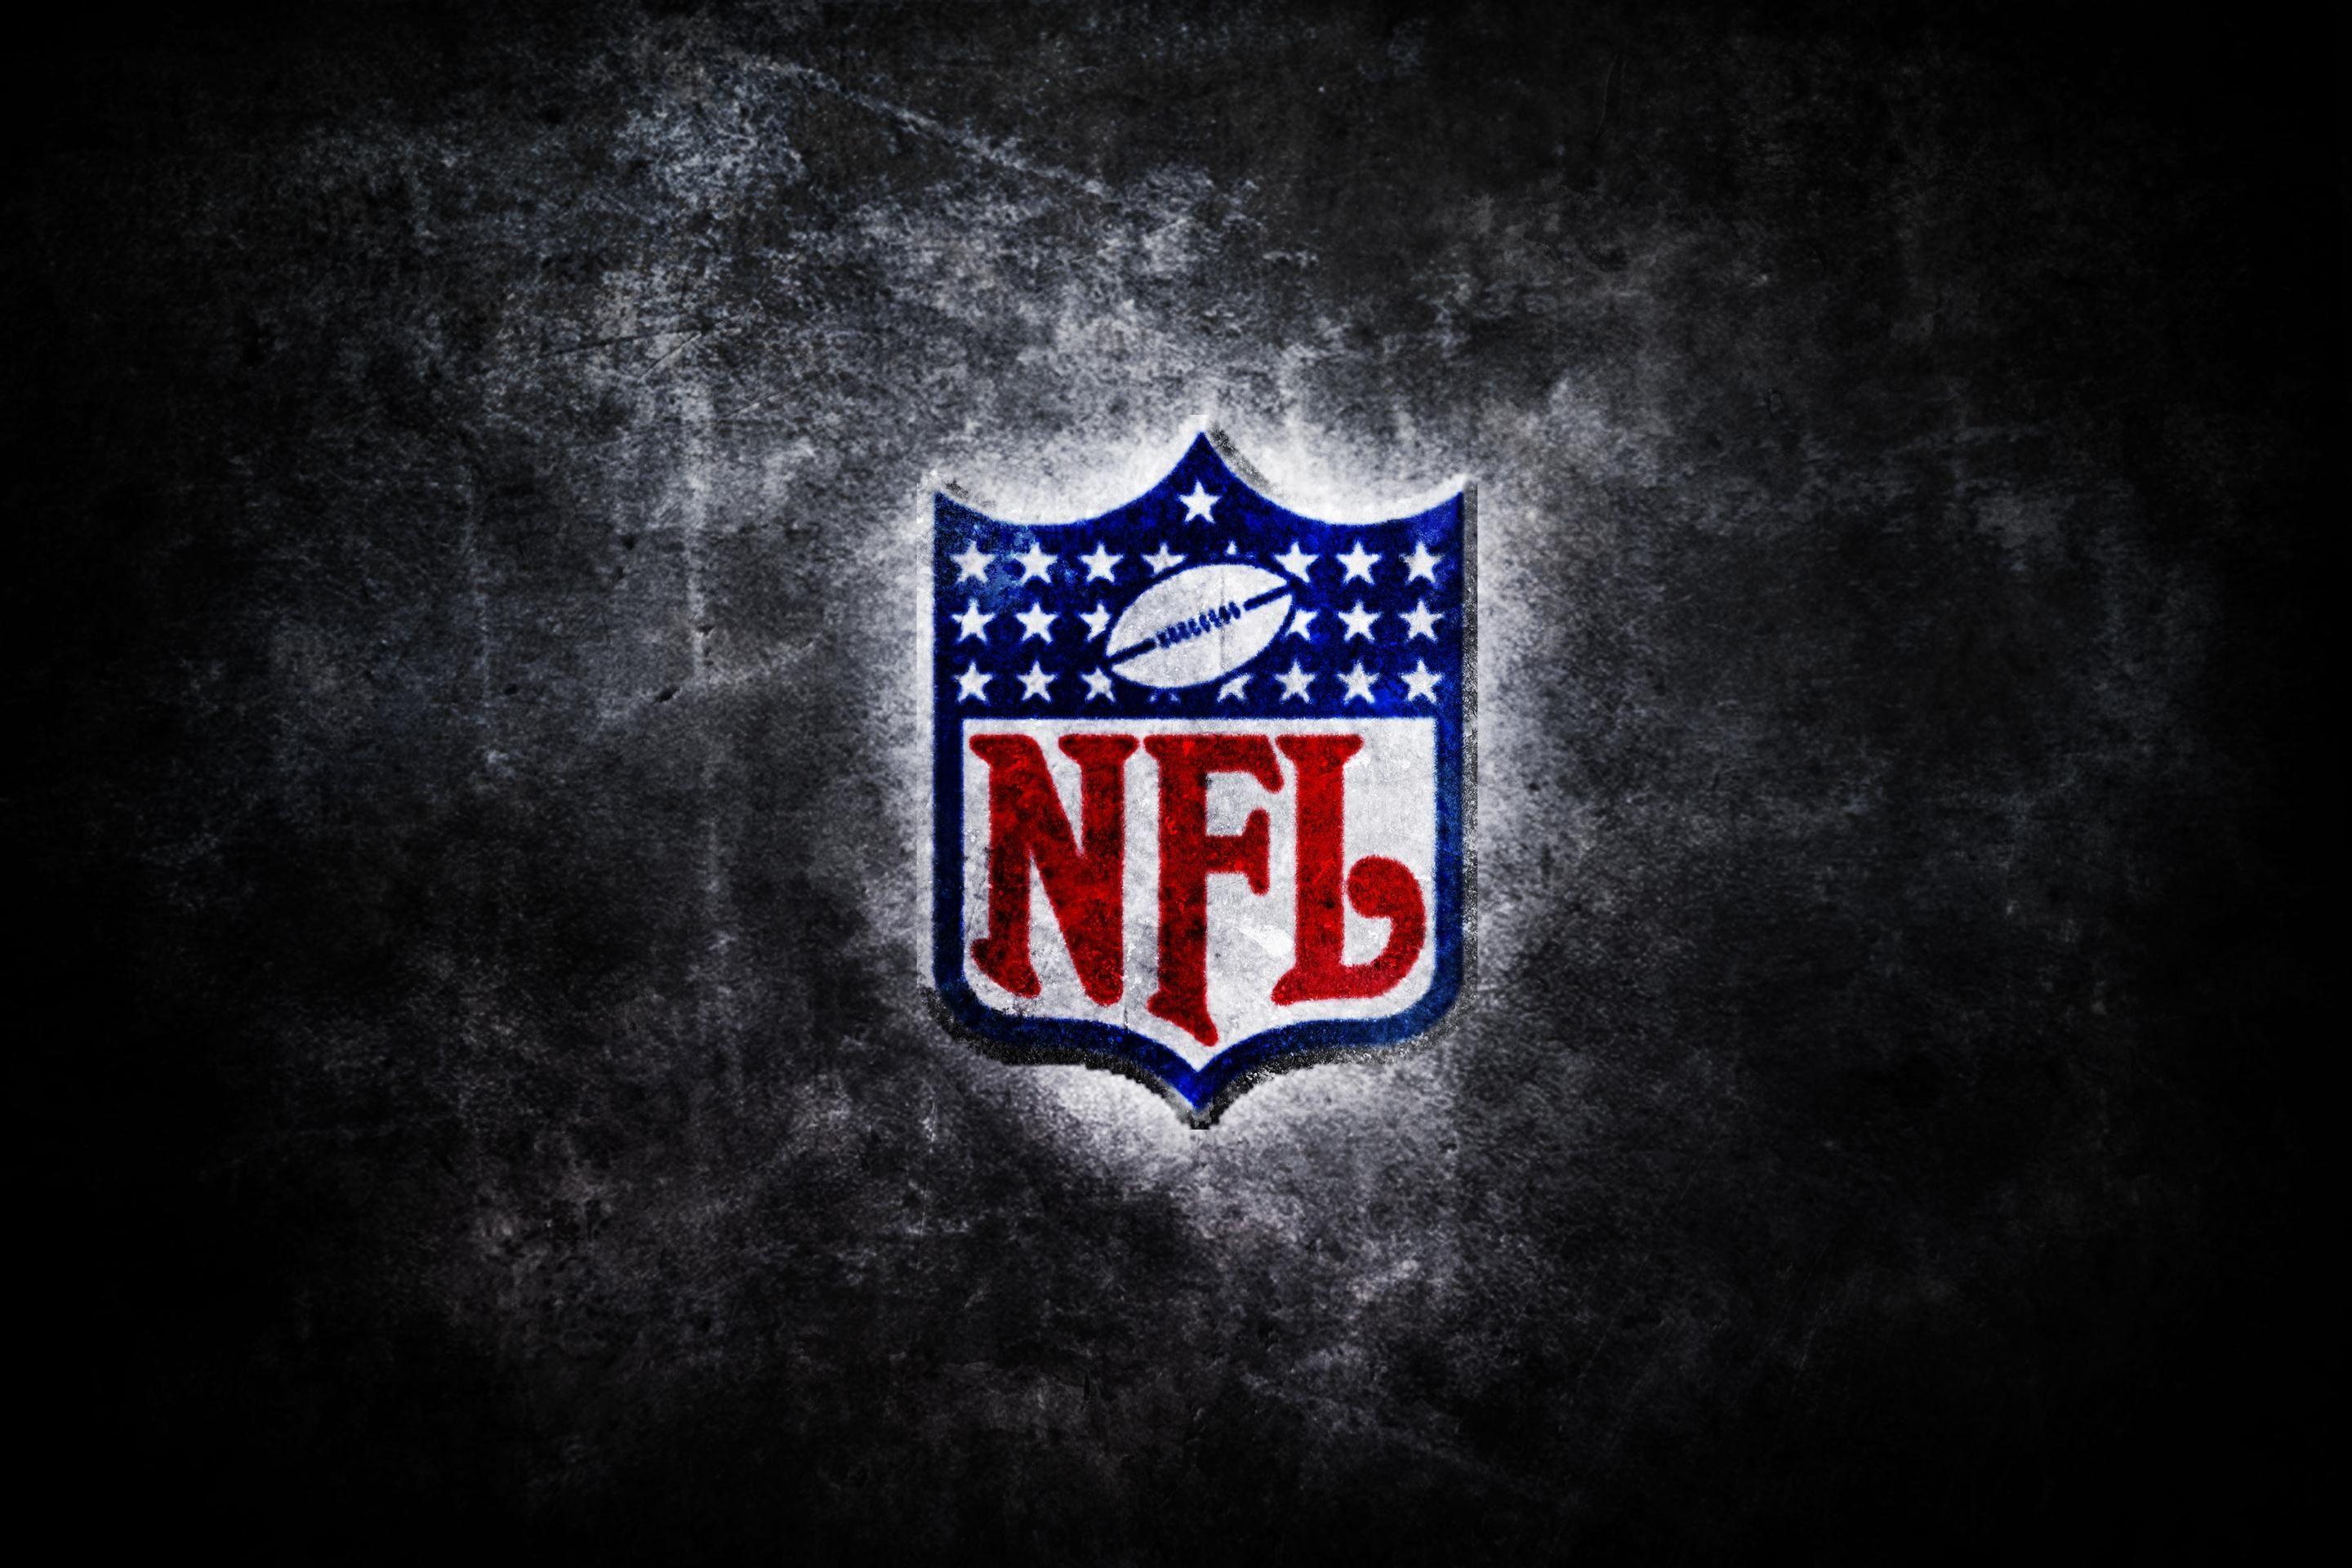 Here you see some nice wallpaper of the National Football League